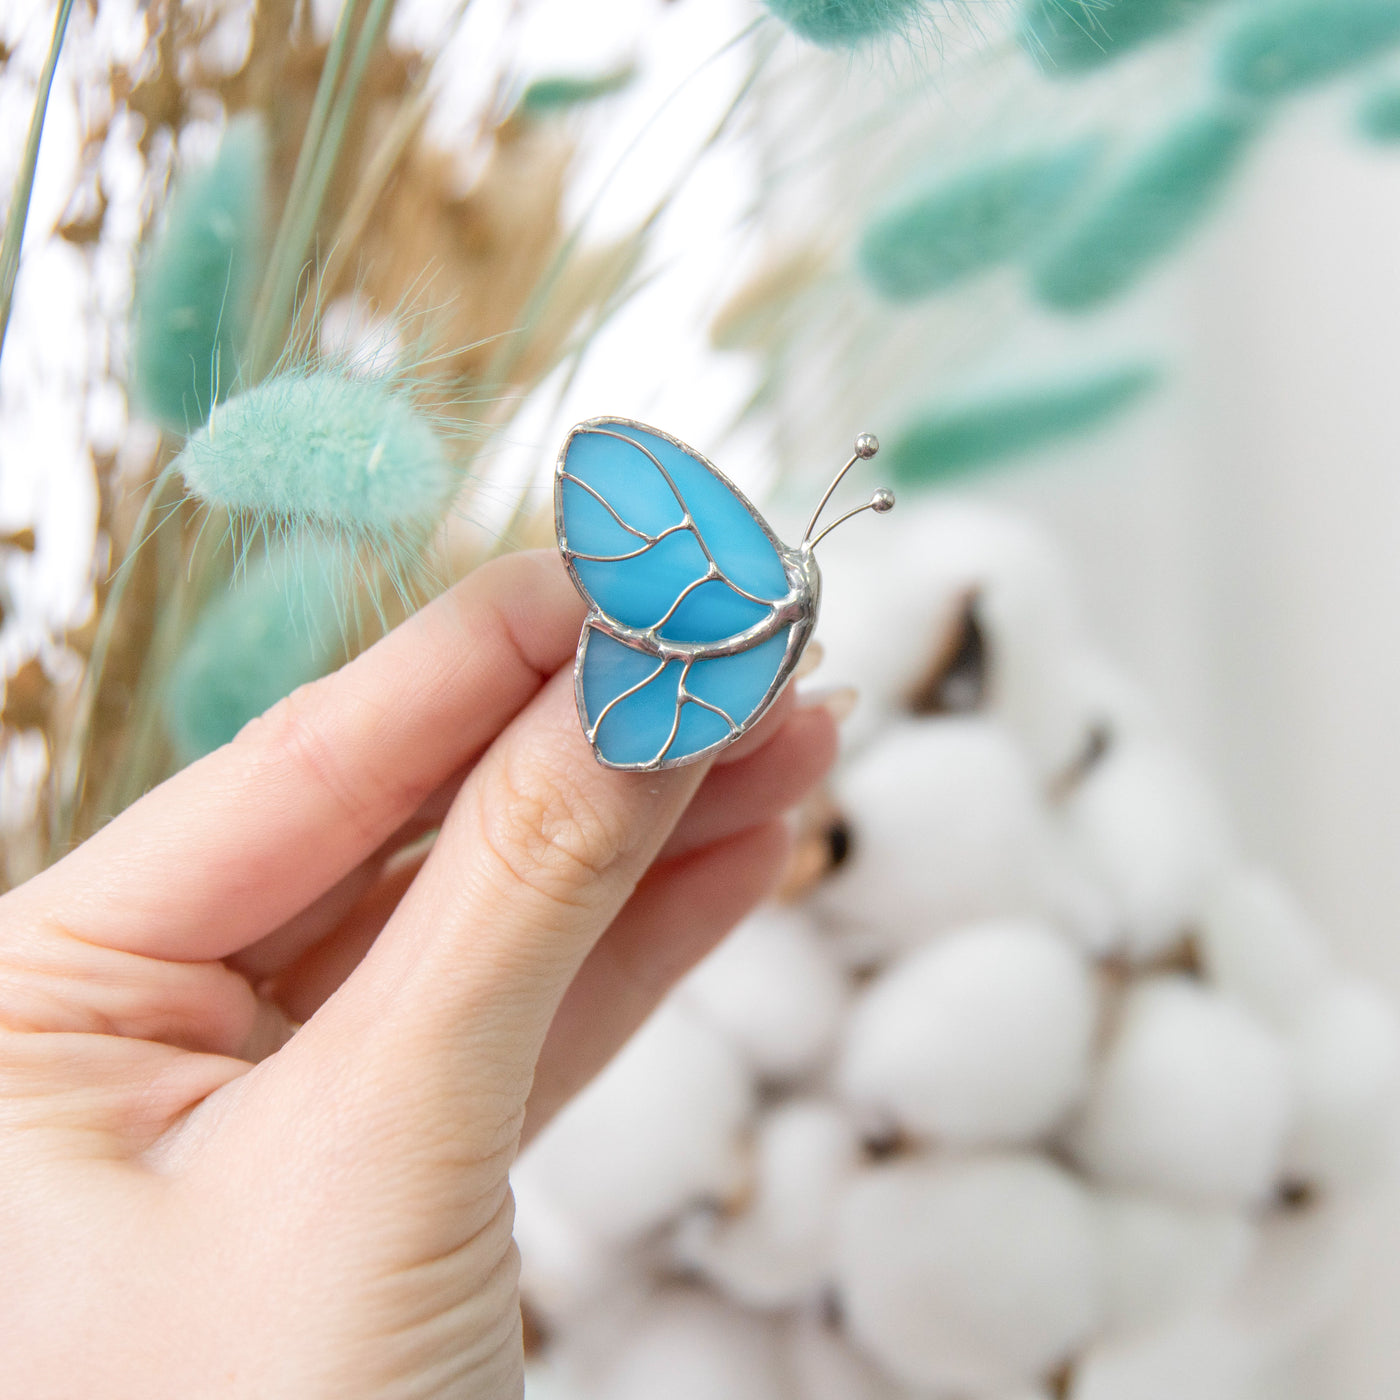 Blue butterfly handmade brooch of stained glass